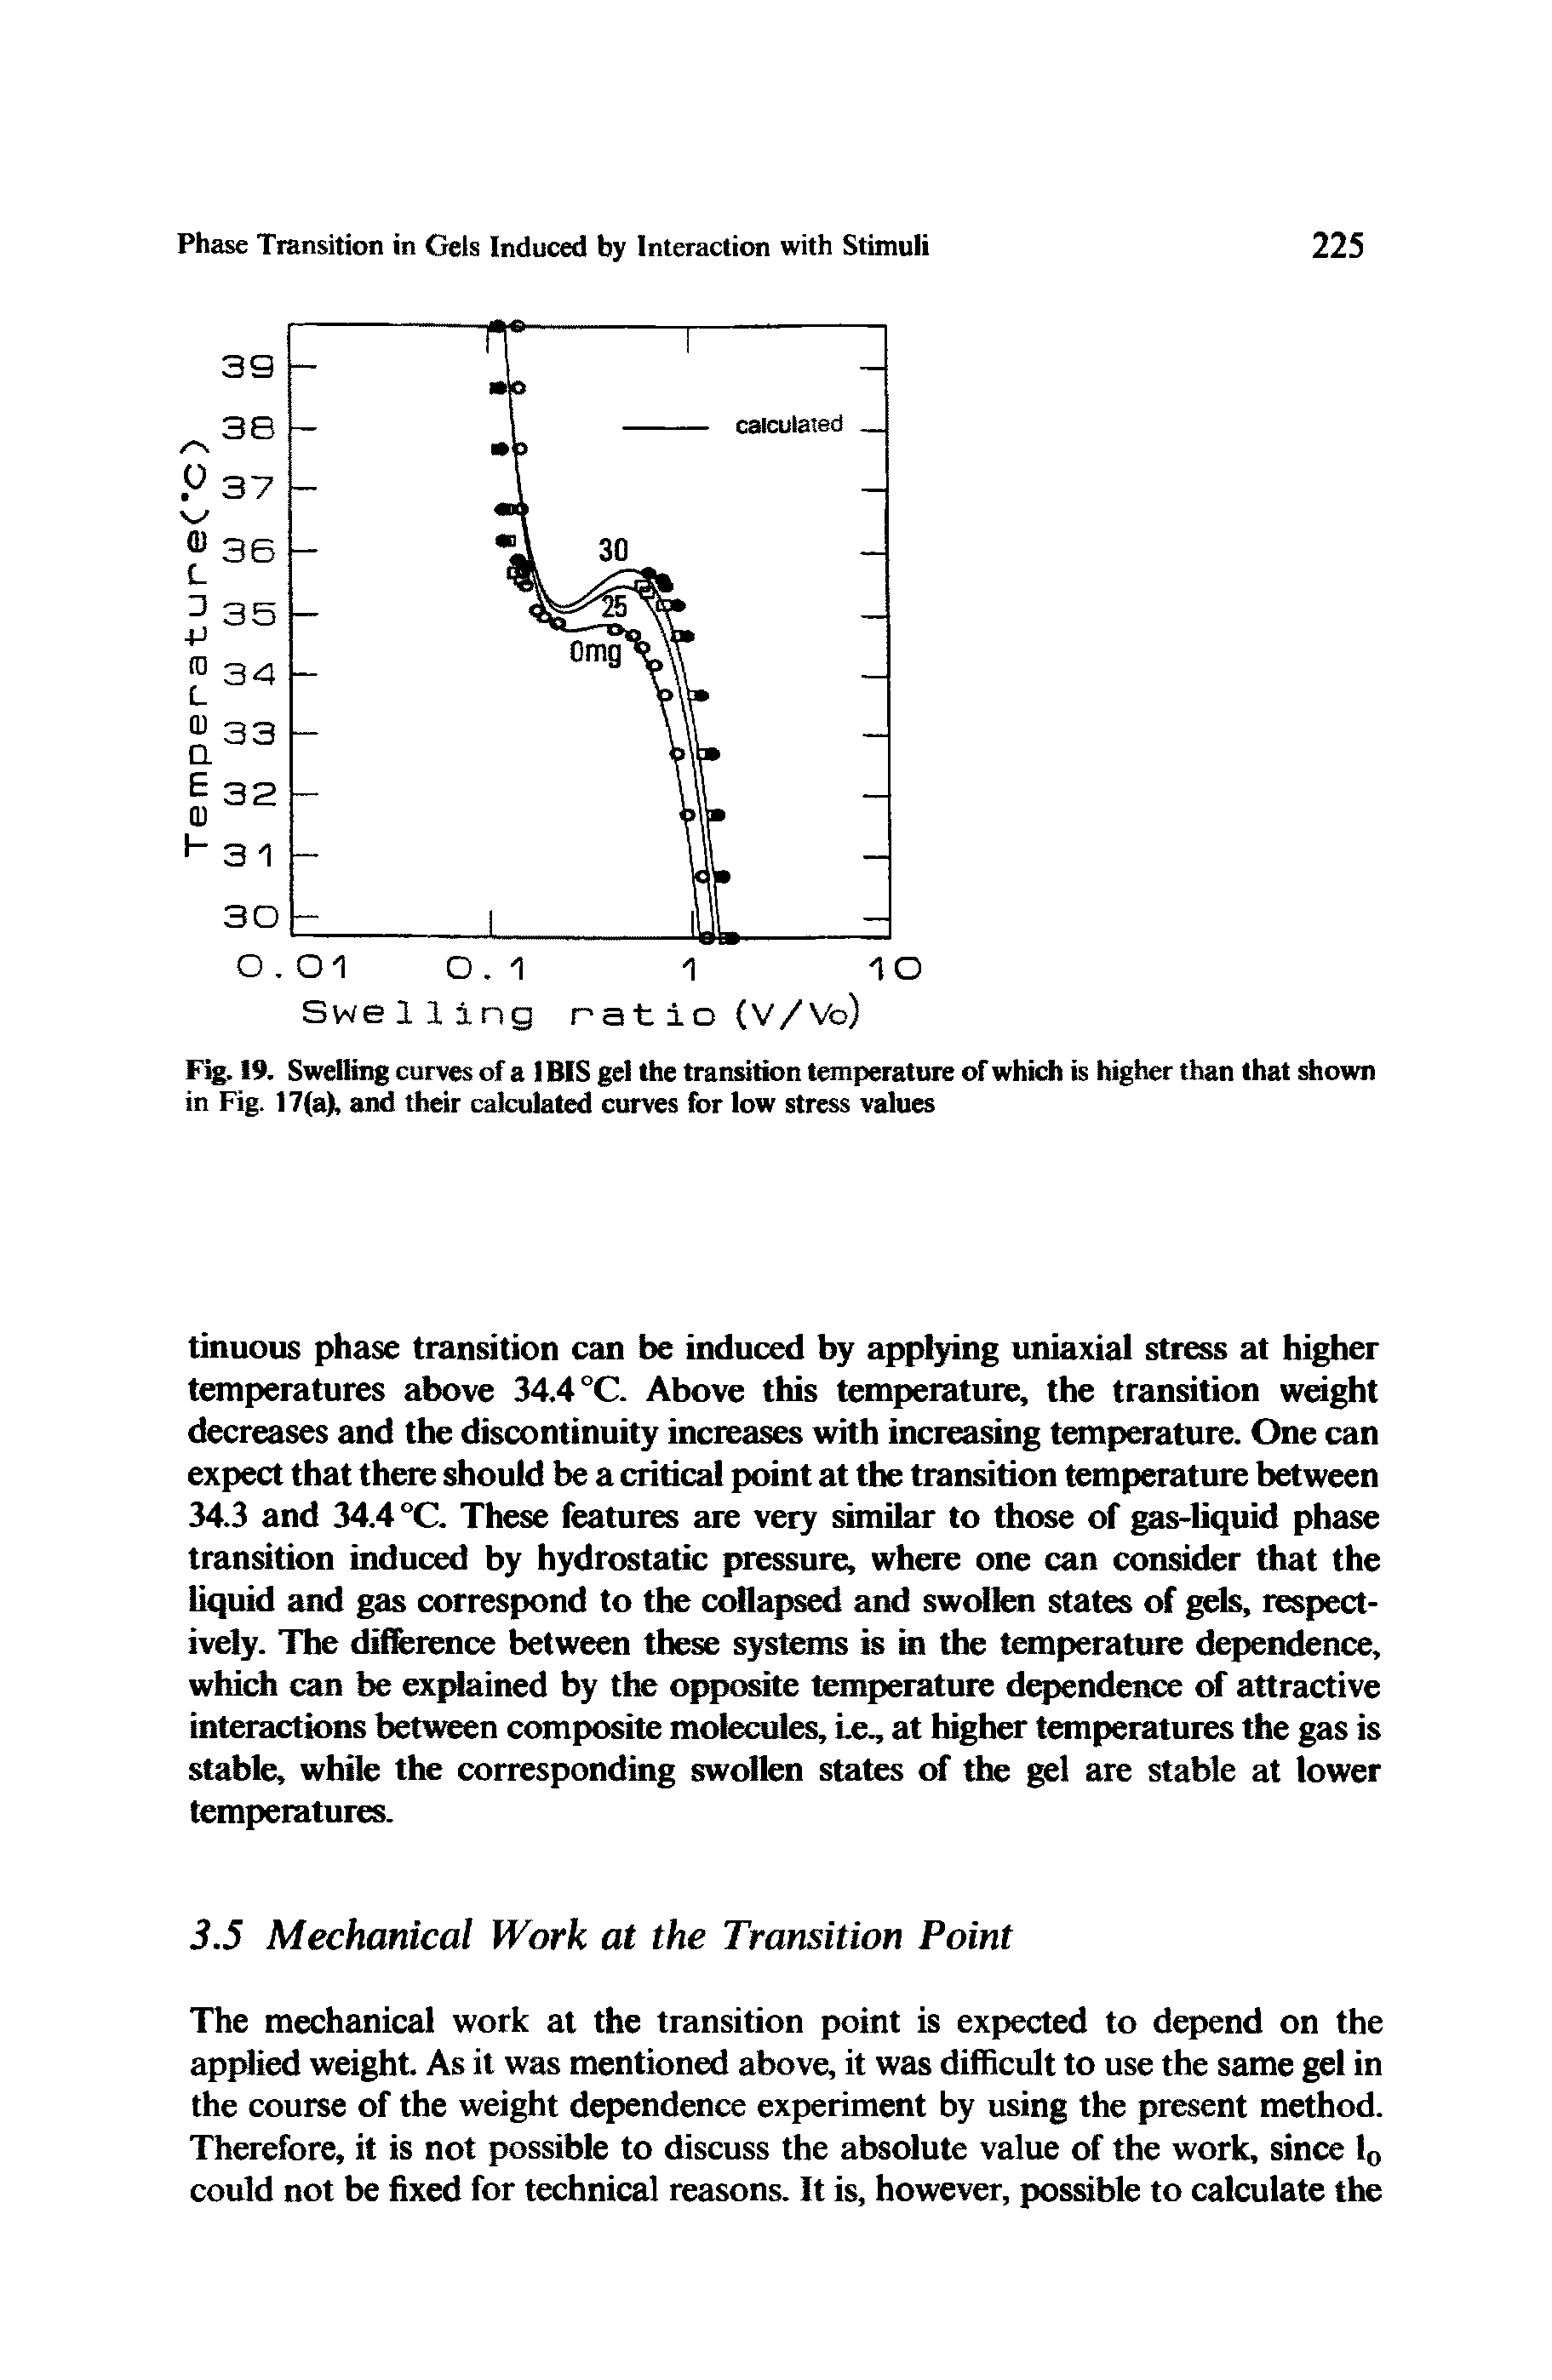 Fig. 19. Swelling curves of a 1 BIS gel the transition temperature of which is higher than that shown in Fig. 17(a), and their calculated curves for low stress values...